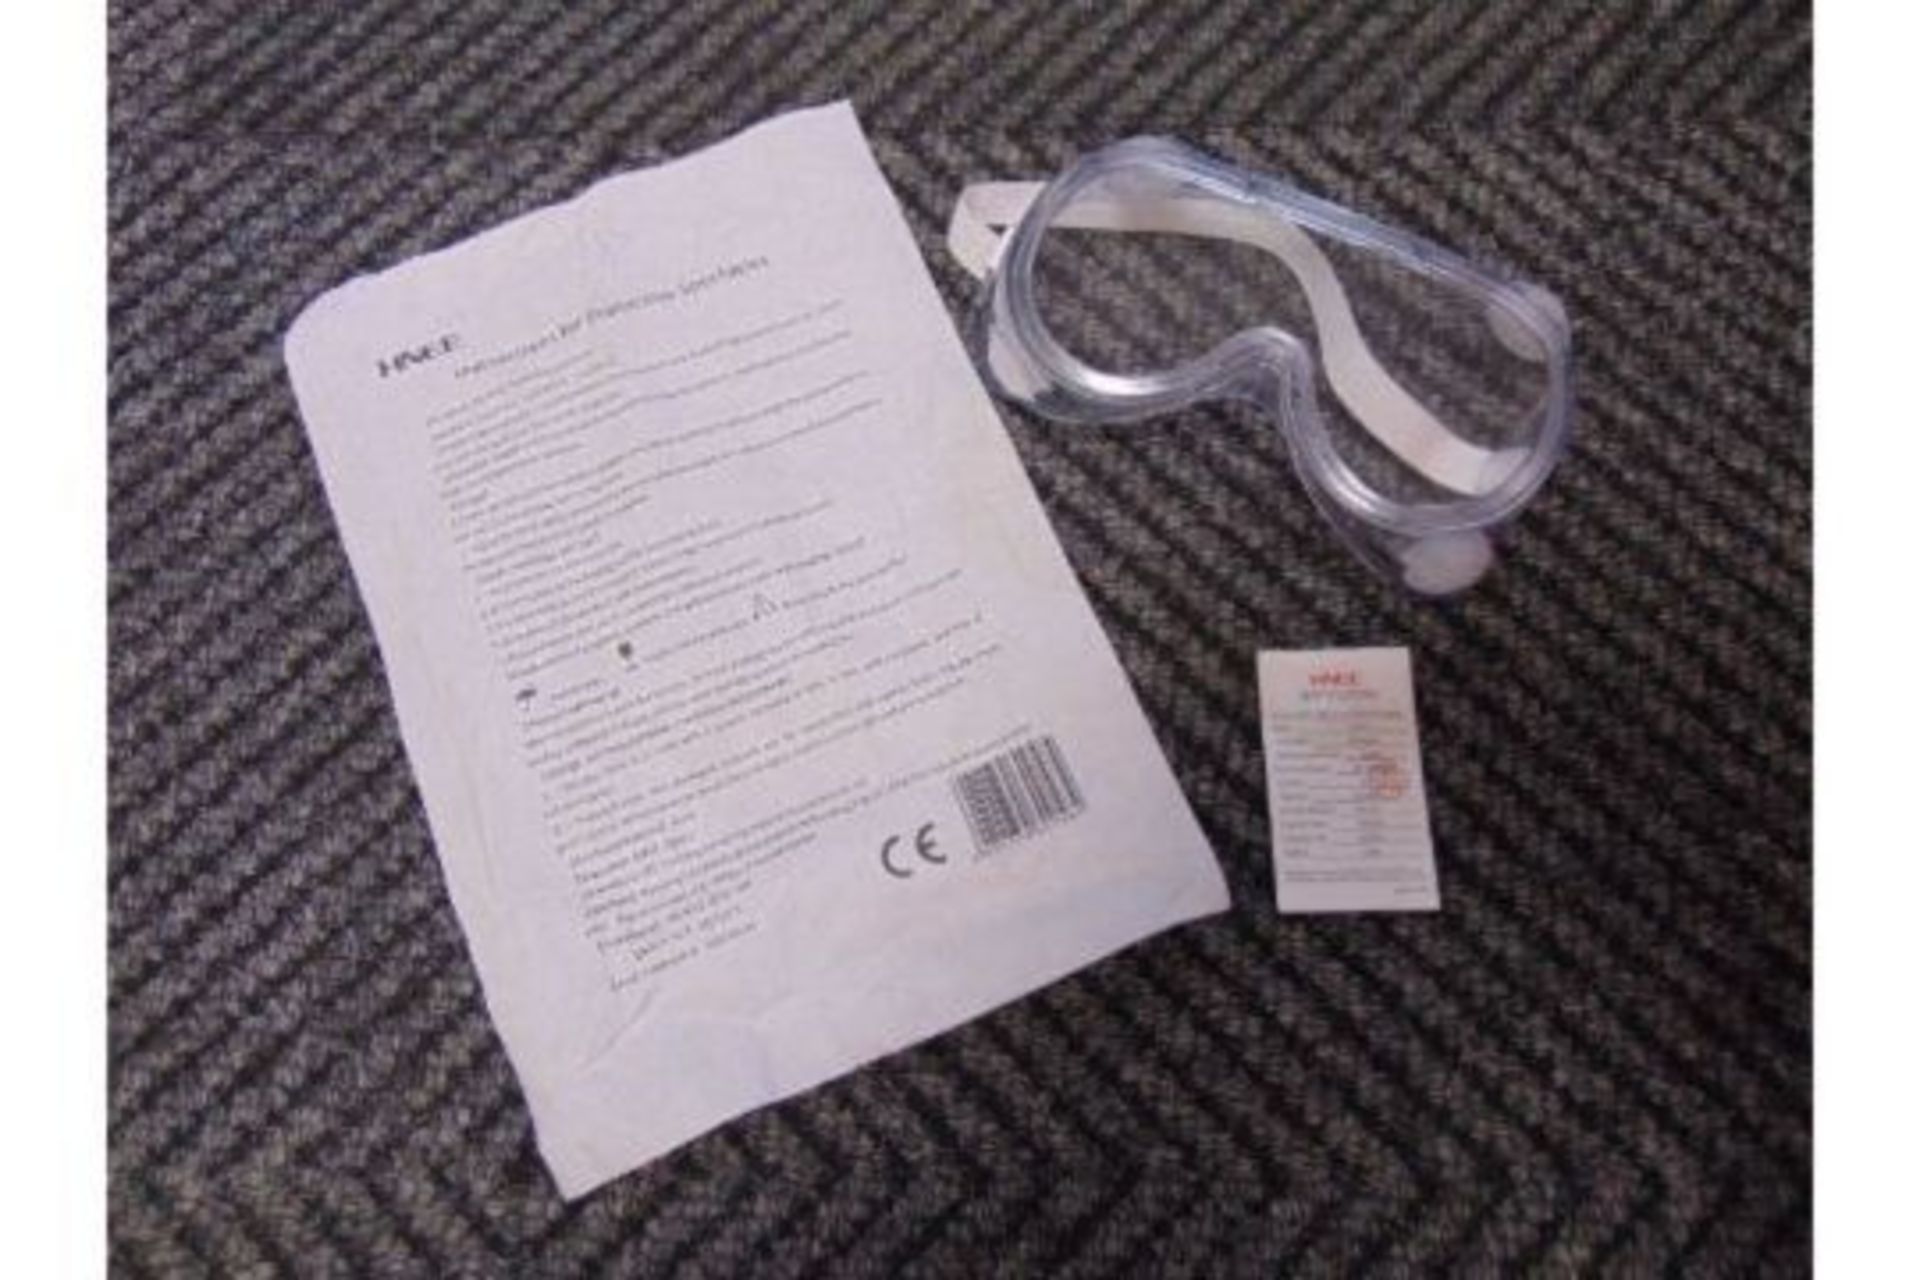 160 x NEW UNISSUED Safety goggles GLYZ1-1 - Image 5 of 15